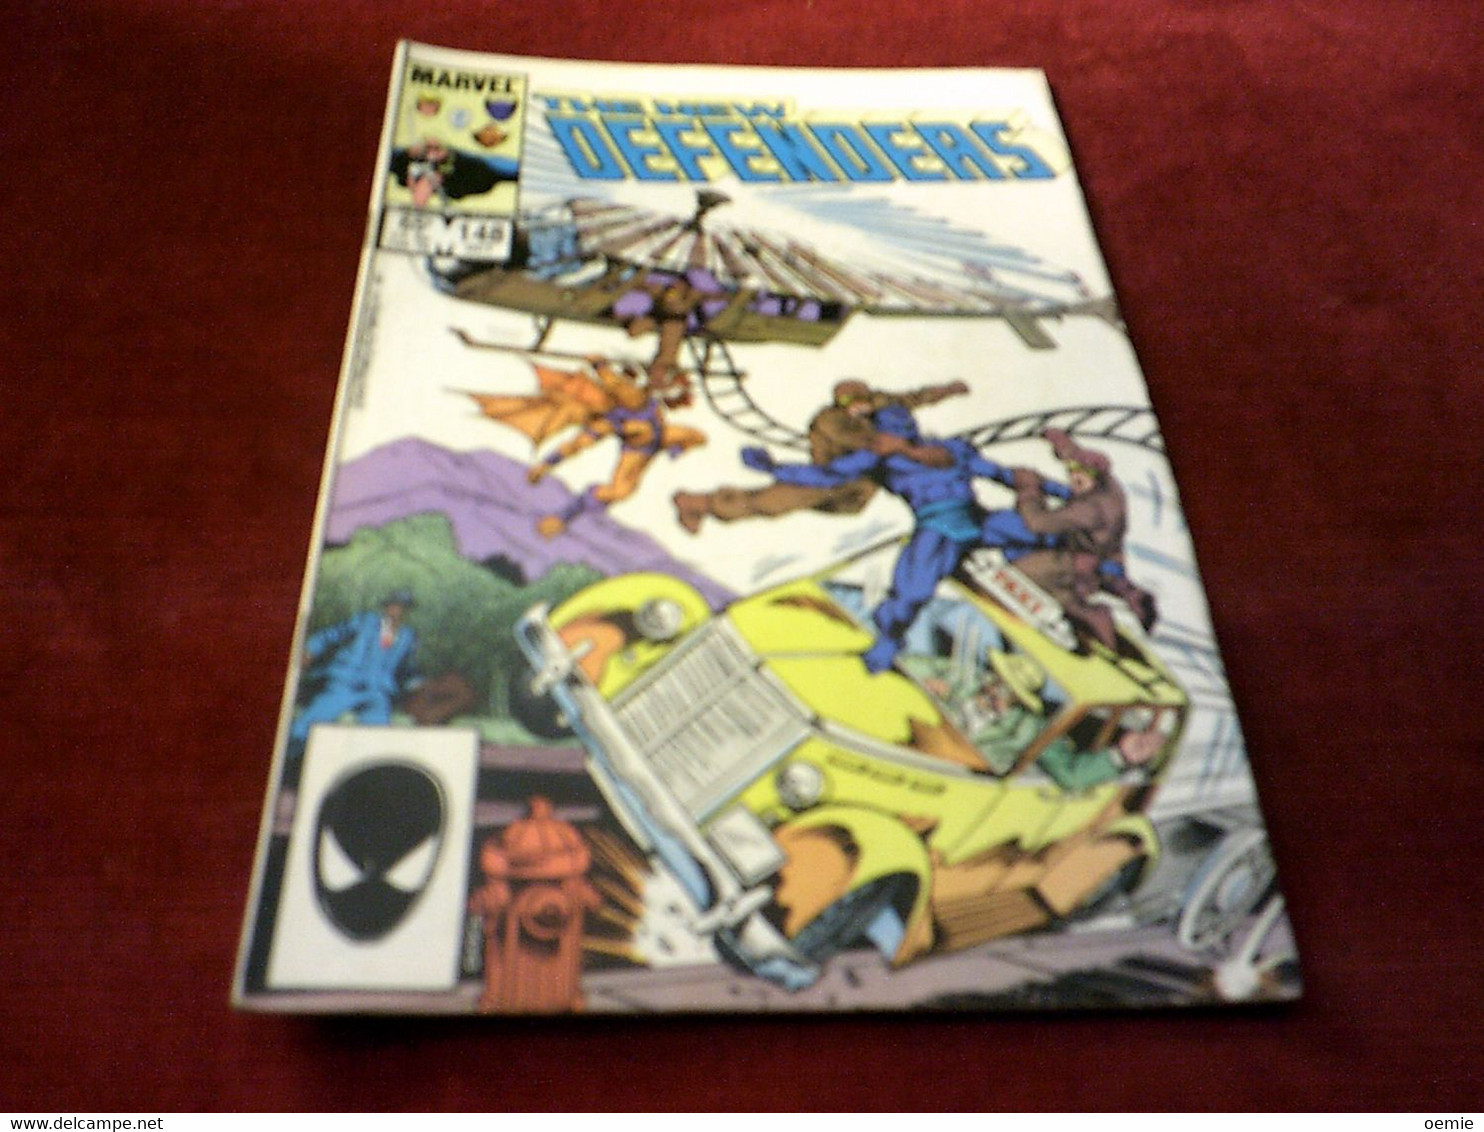 THE  NEW DEFENDERS  N° 148 OCT 1985 - Marvel